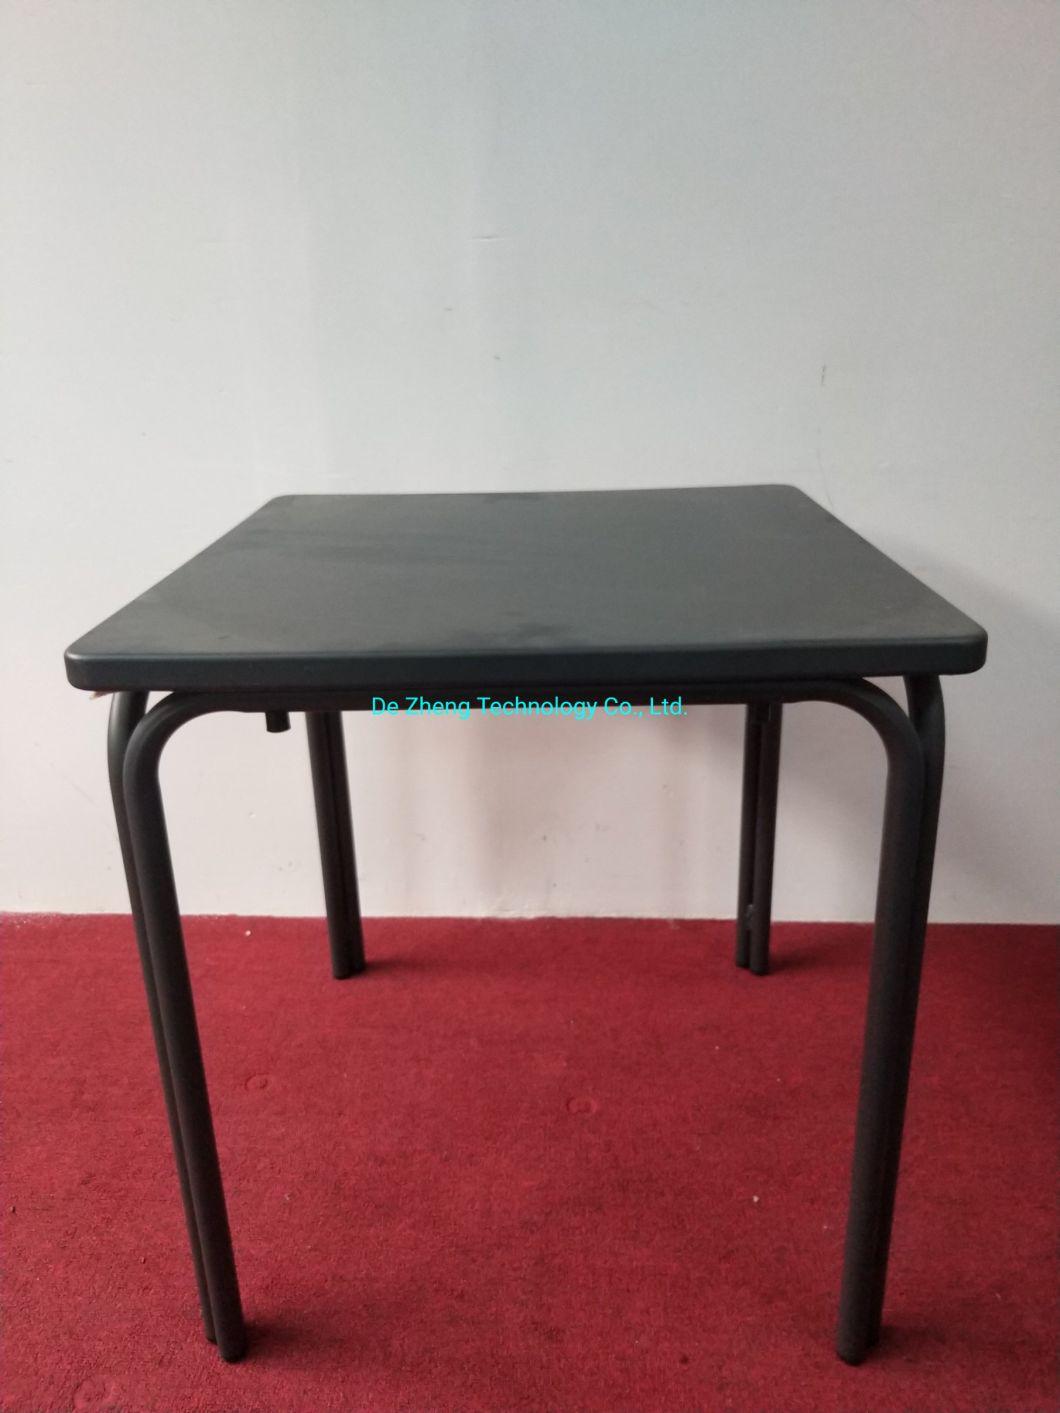 Absolute Rain Resistance Anti-Rust Carbon Steel Top Restaurant Cafe Bar Grill Table for Outdoor Use